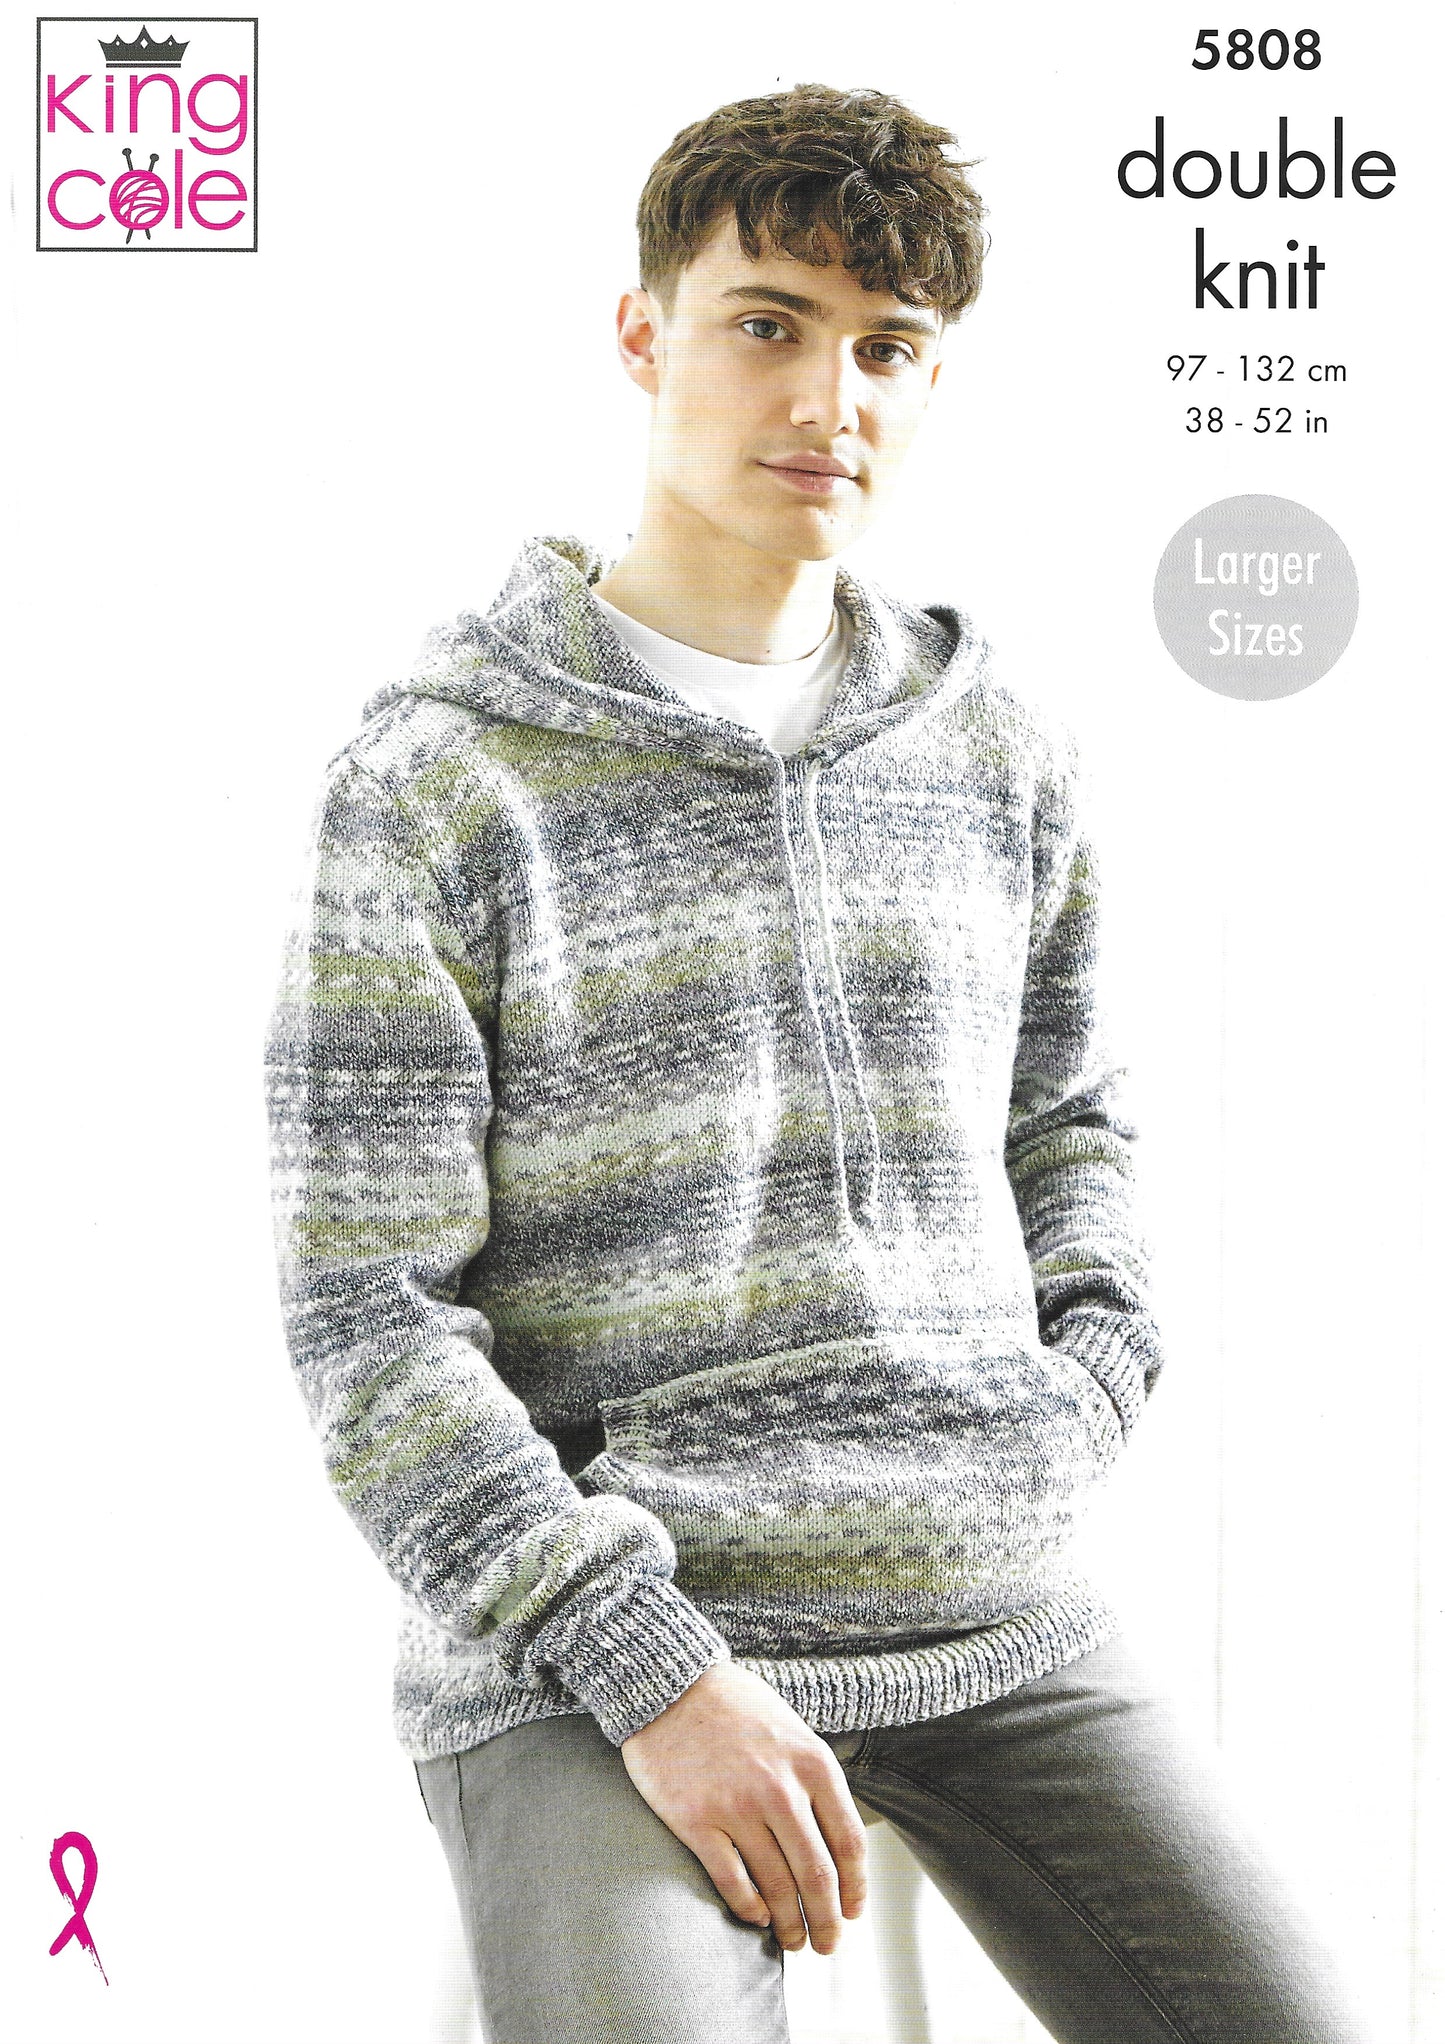 King Cole 5808 Hoodie and Cardigan DK Knitting Pattern